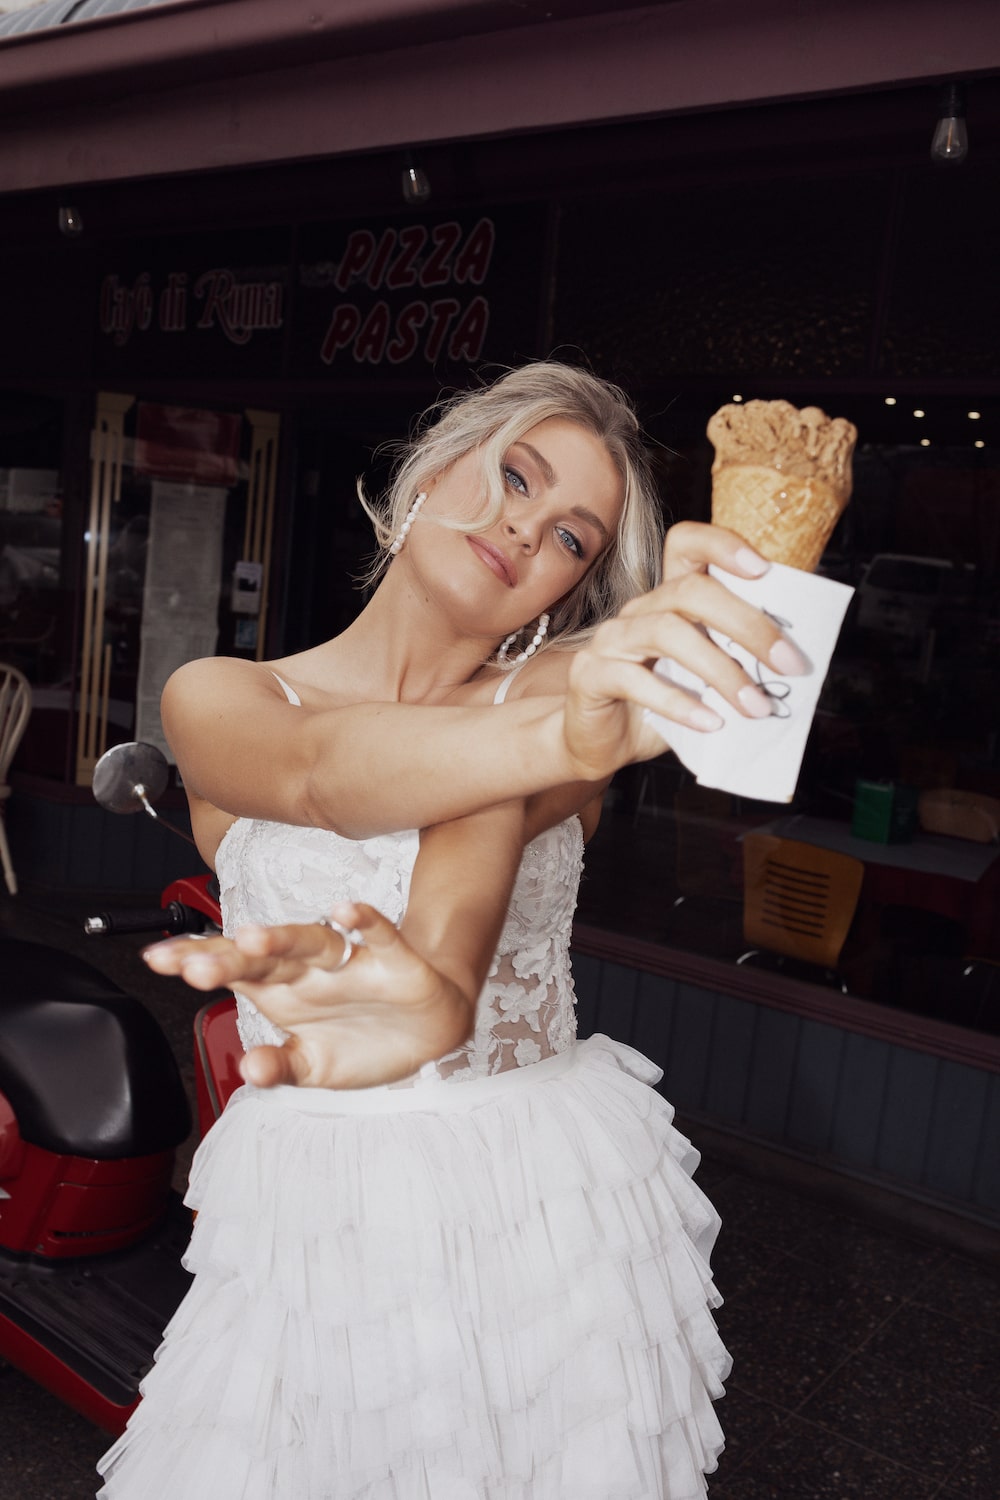 Model posing with icecream in front of red scooter wearing the Rikki top and Ricciolina skirt.